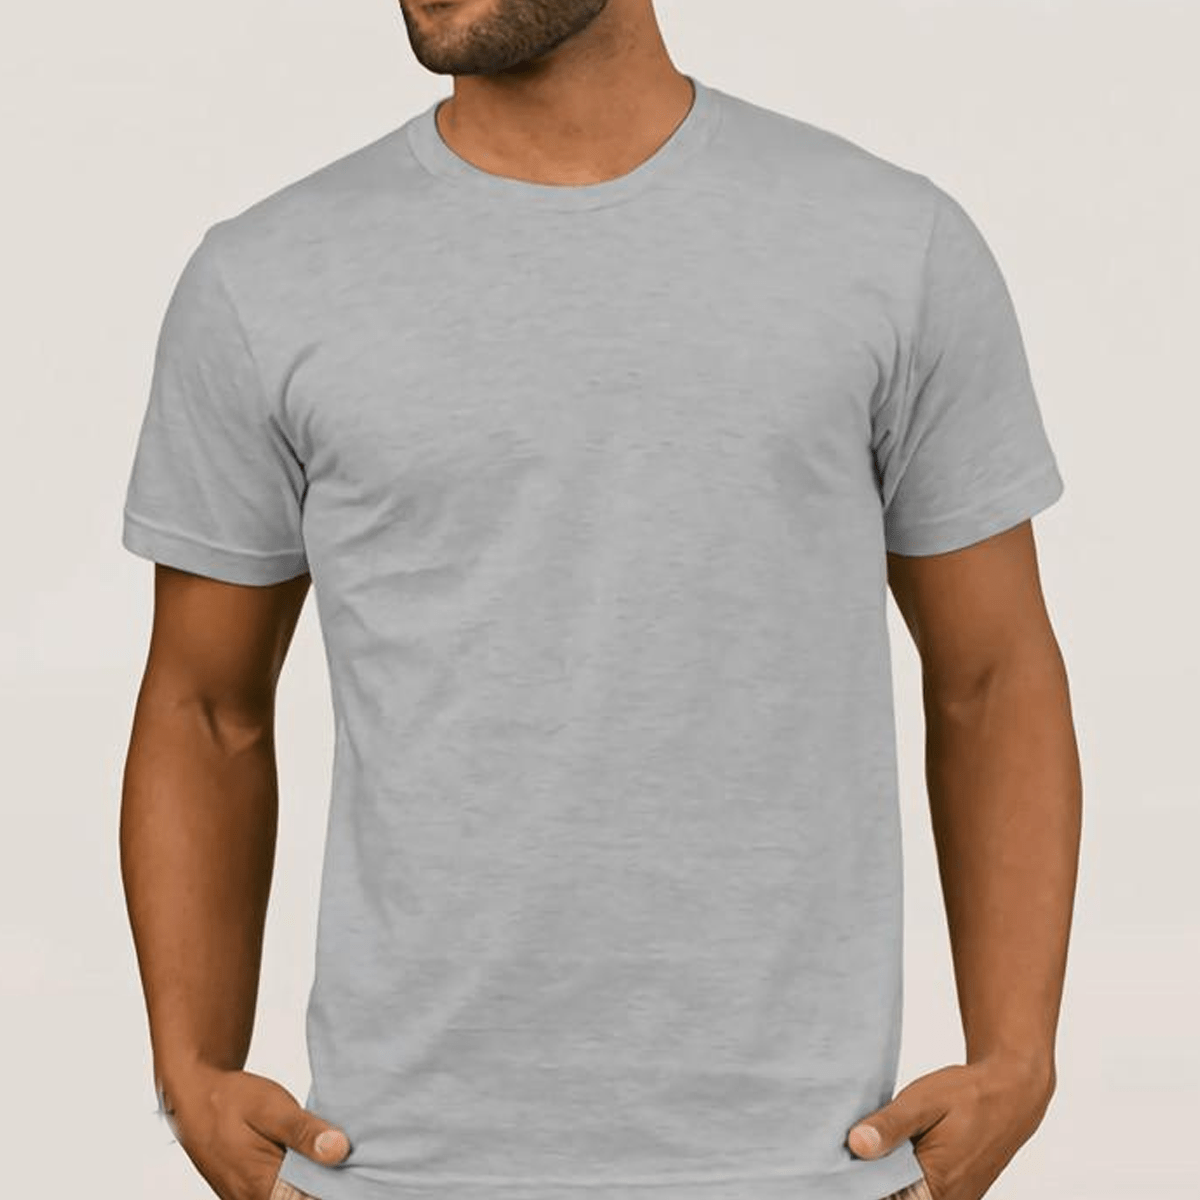 Proud Brother Of A Freaking Awesome Bro - Casual 160Gsm Round Neck T Shirts